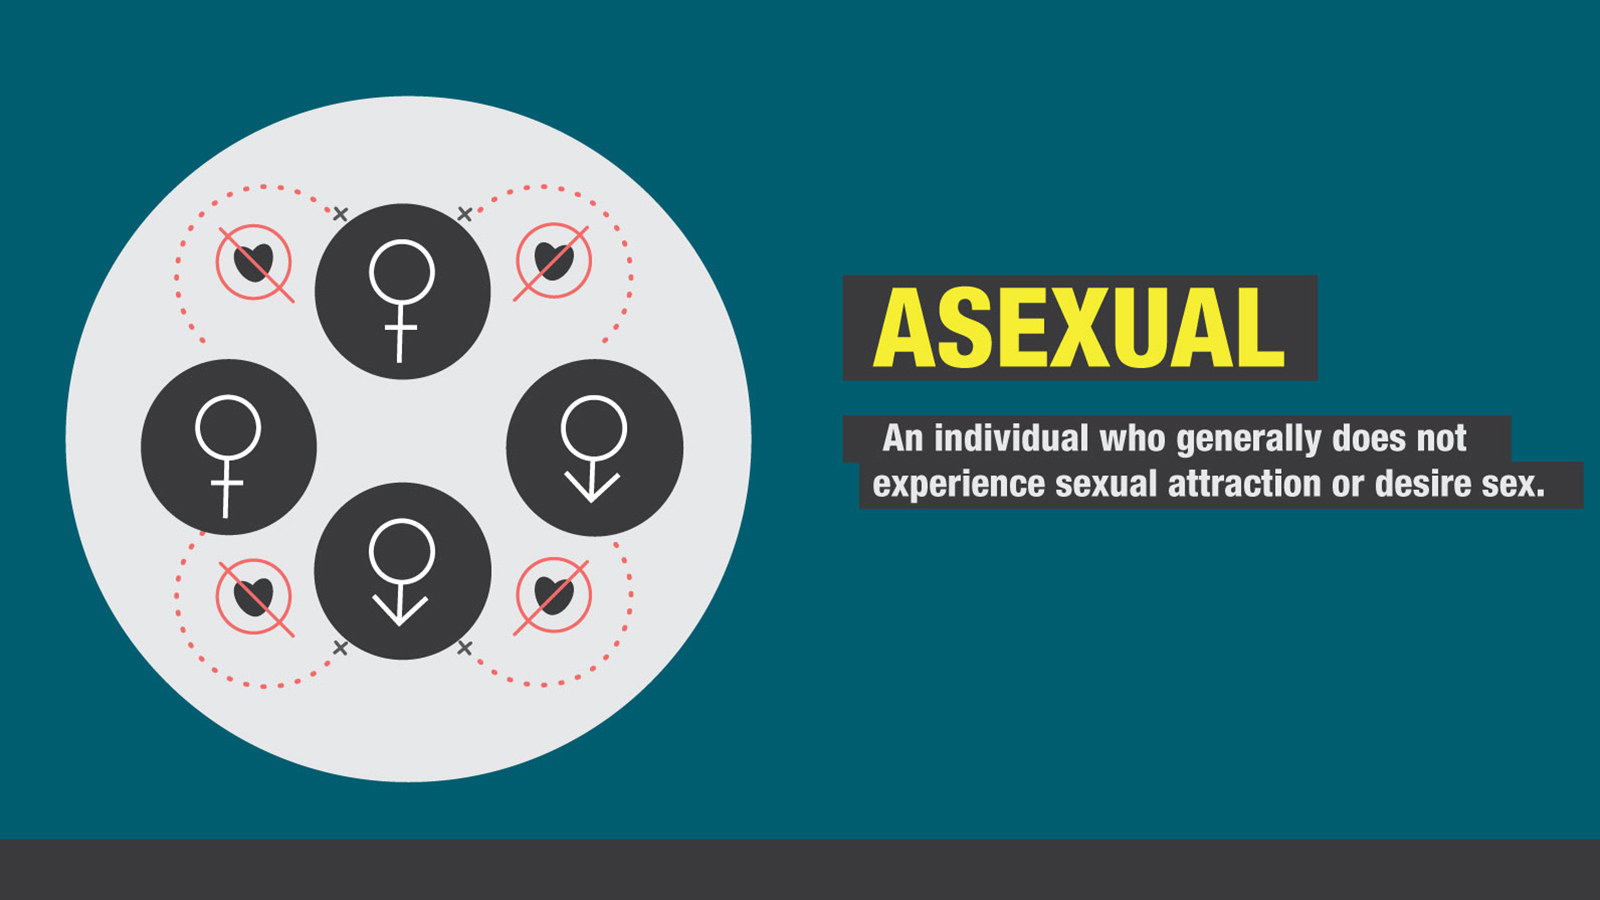 151106113125-gender-sexuality-asexual.jp